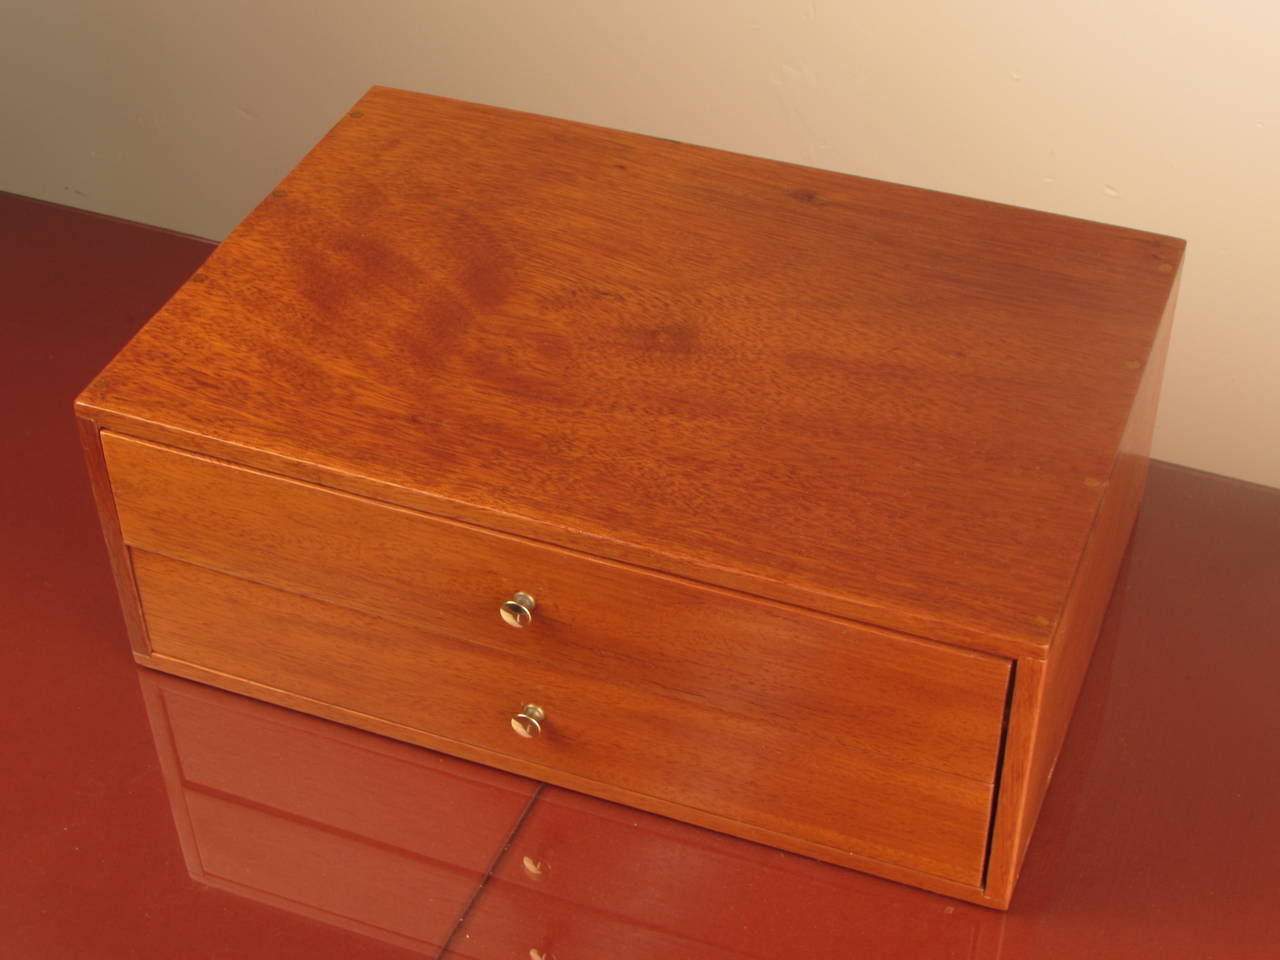 Polished Lovely Dresser or Jewelry Box in the style of Paul McCobb